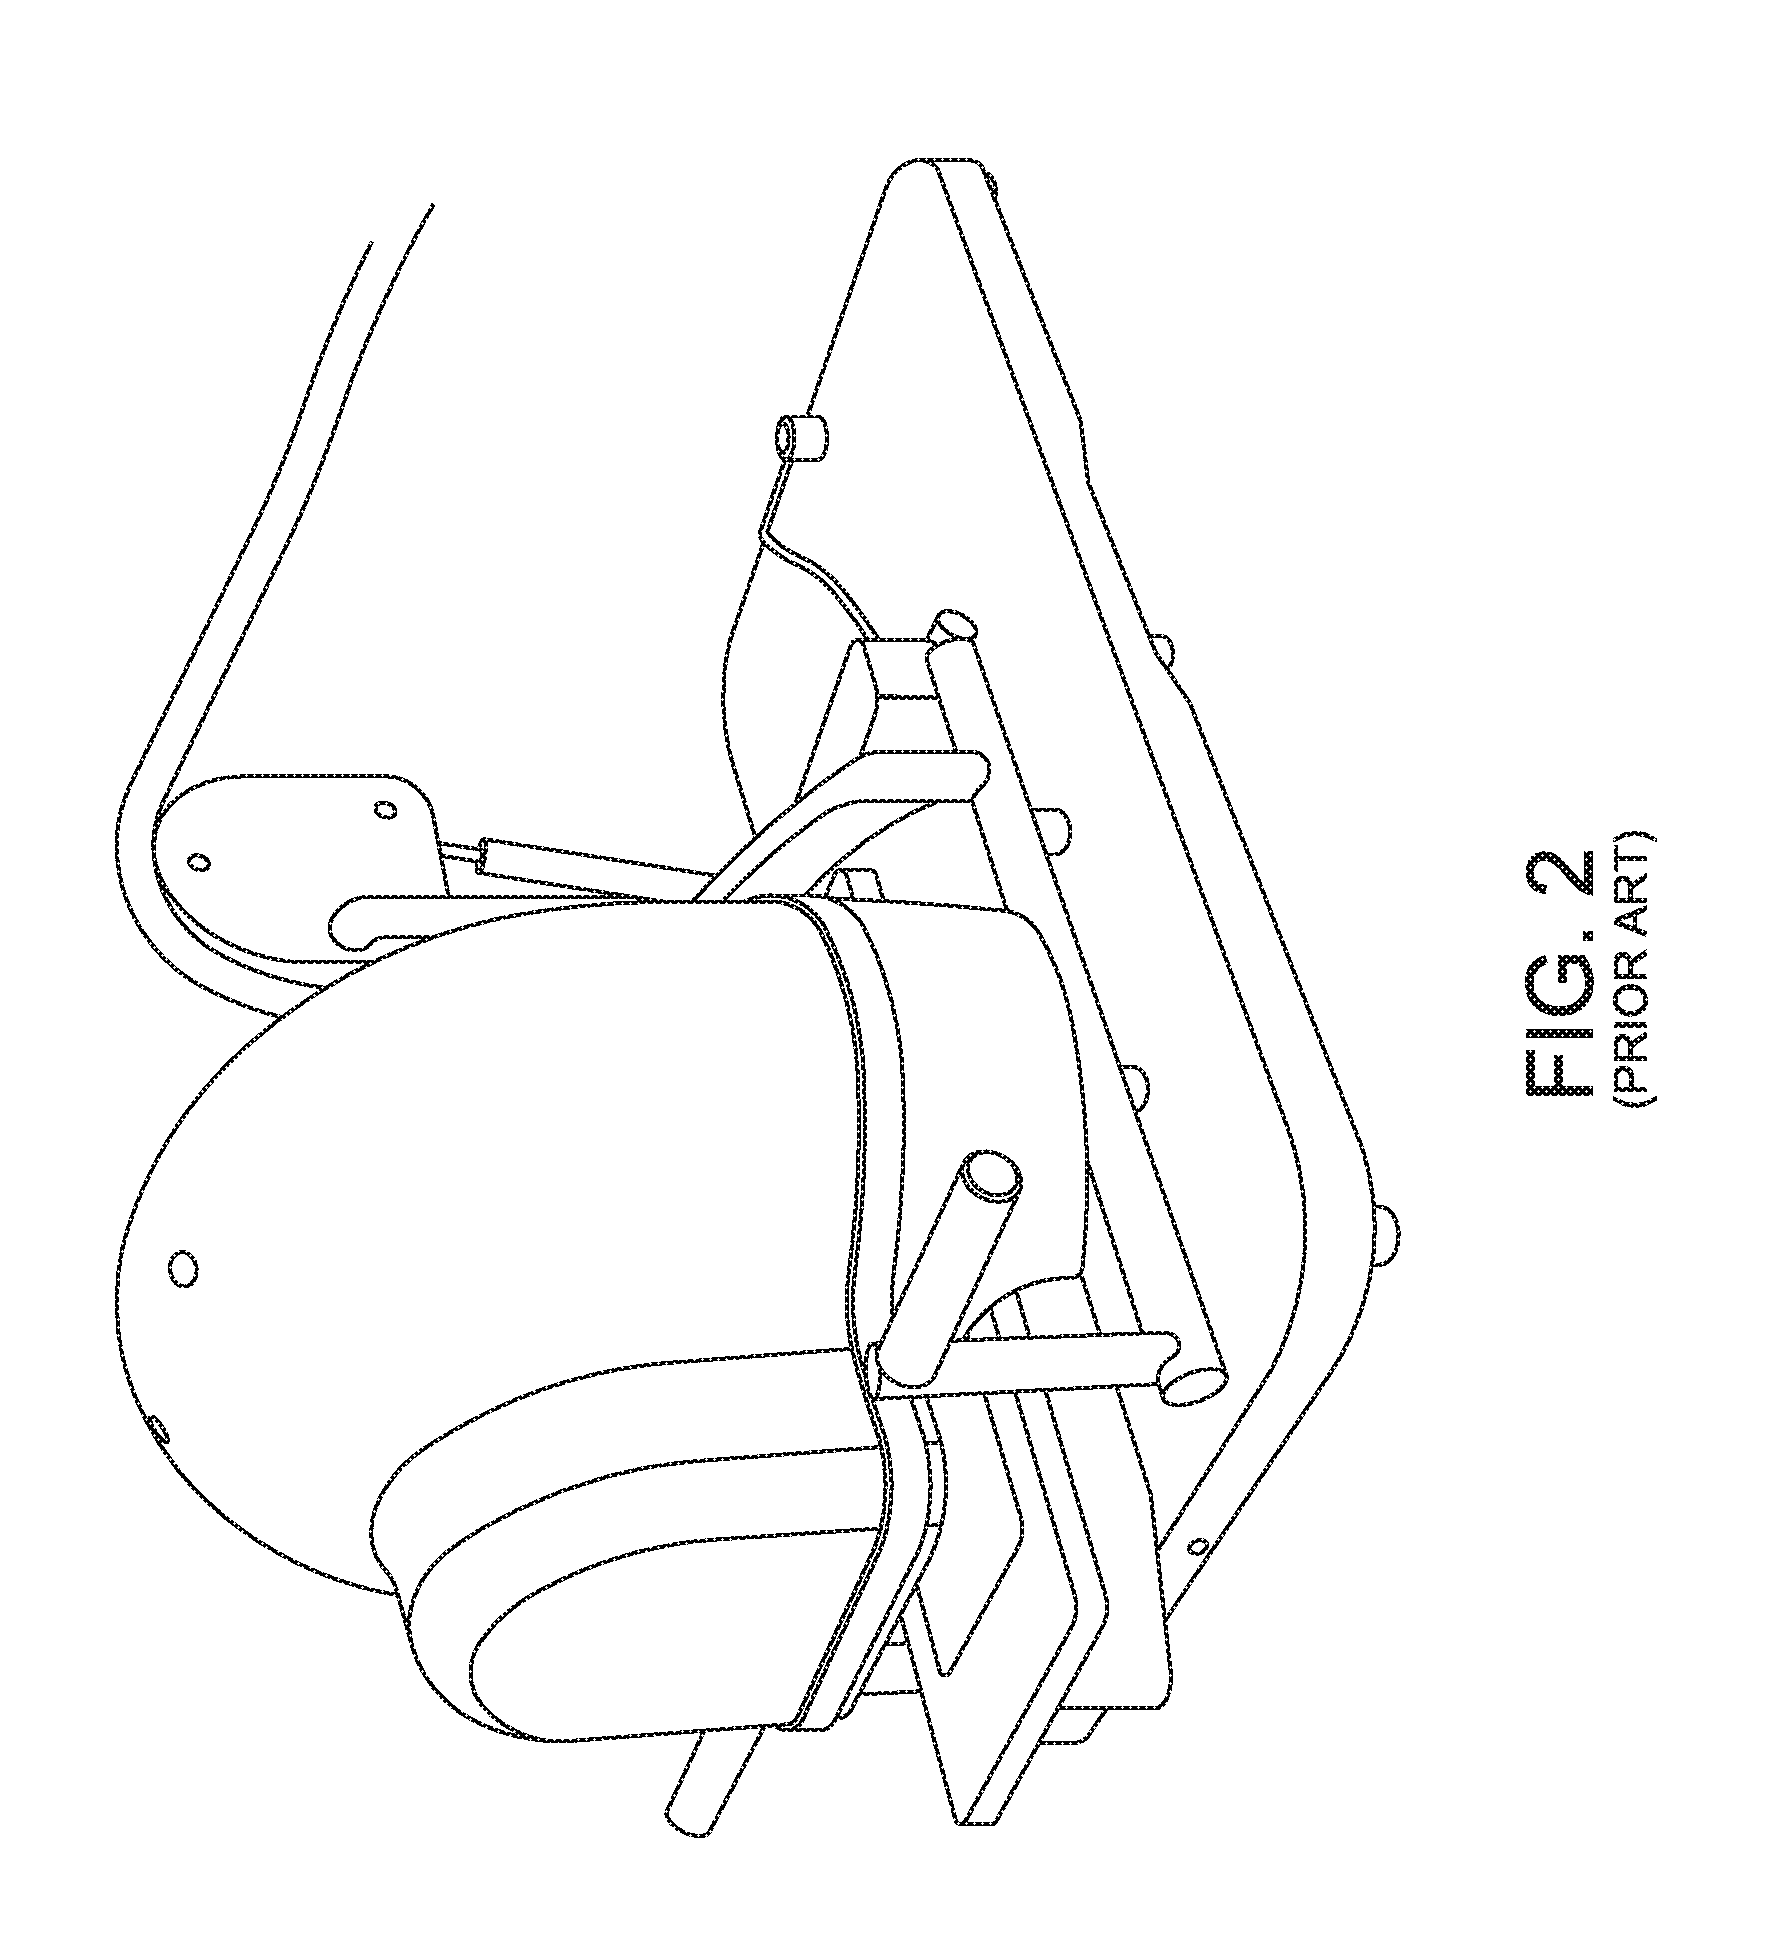 Combined stimulator and bipolar electrode assembly for mouse electroretinography (ERG)